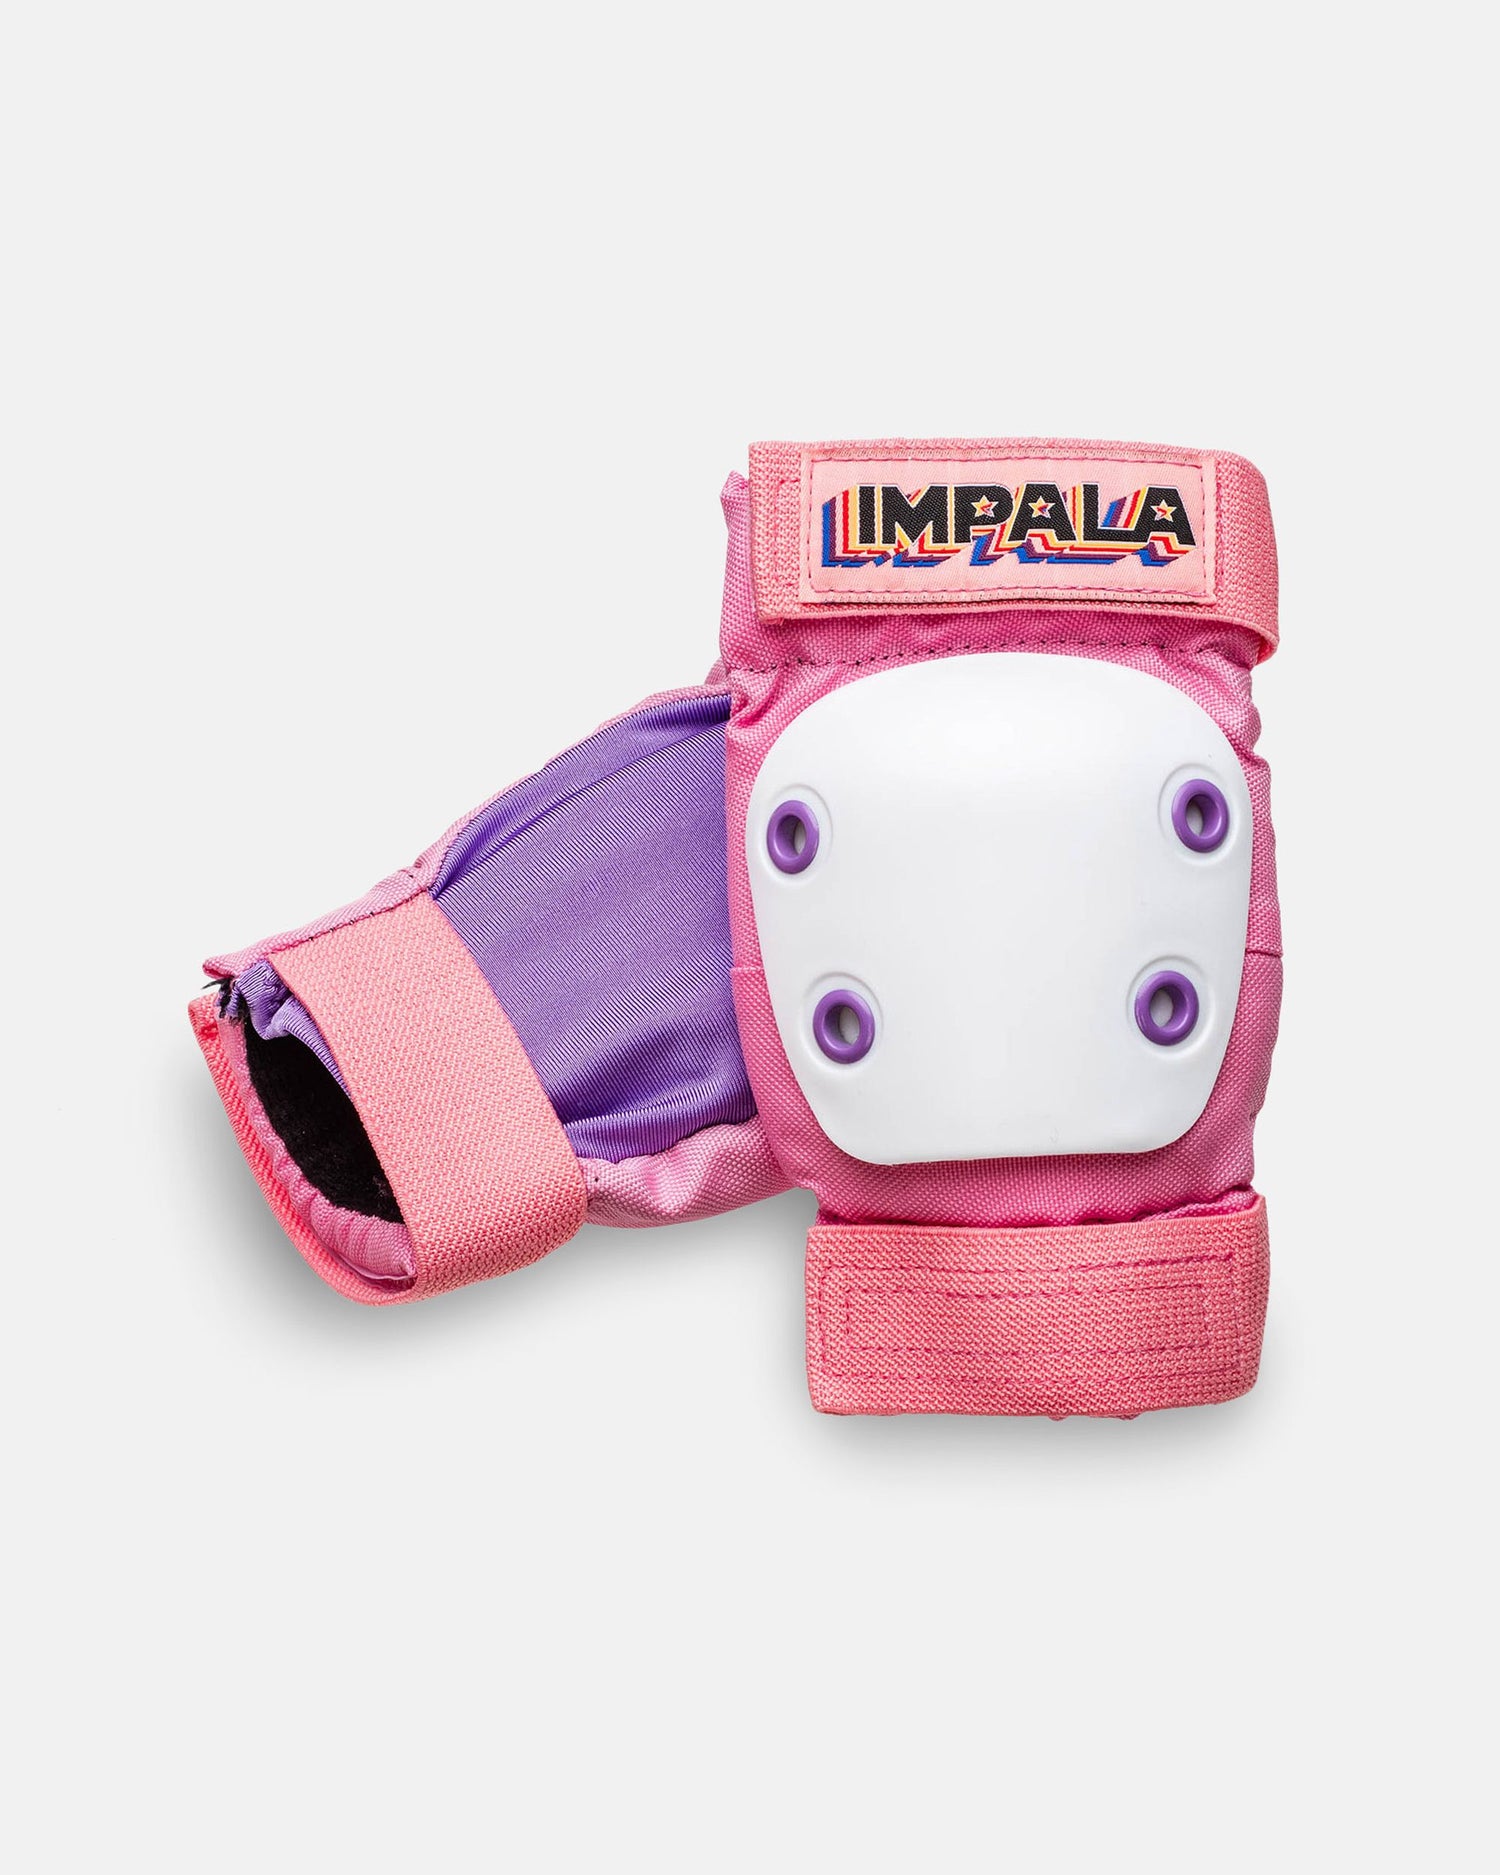 Elbow pads in the Impala Protective Set Youth - Pink